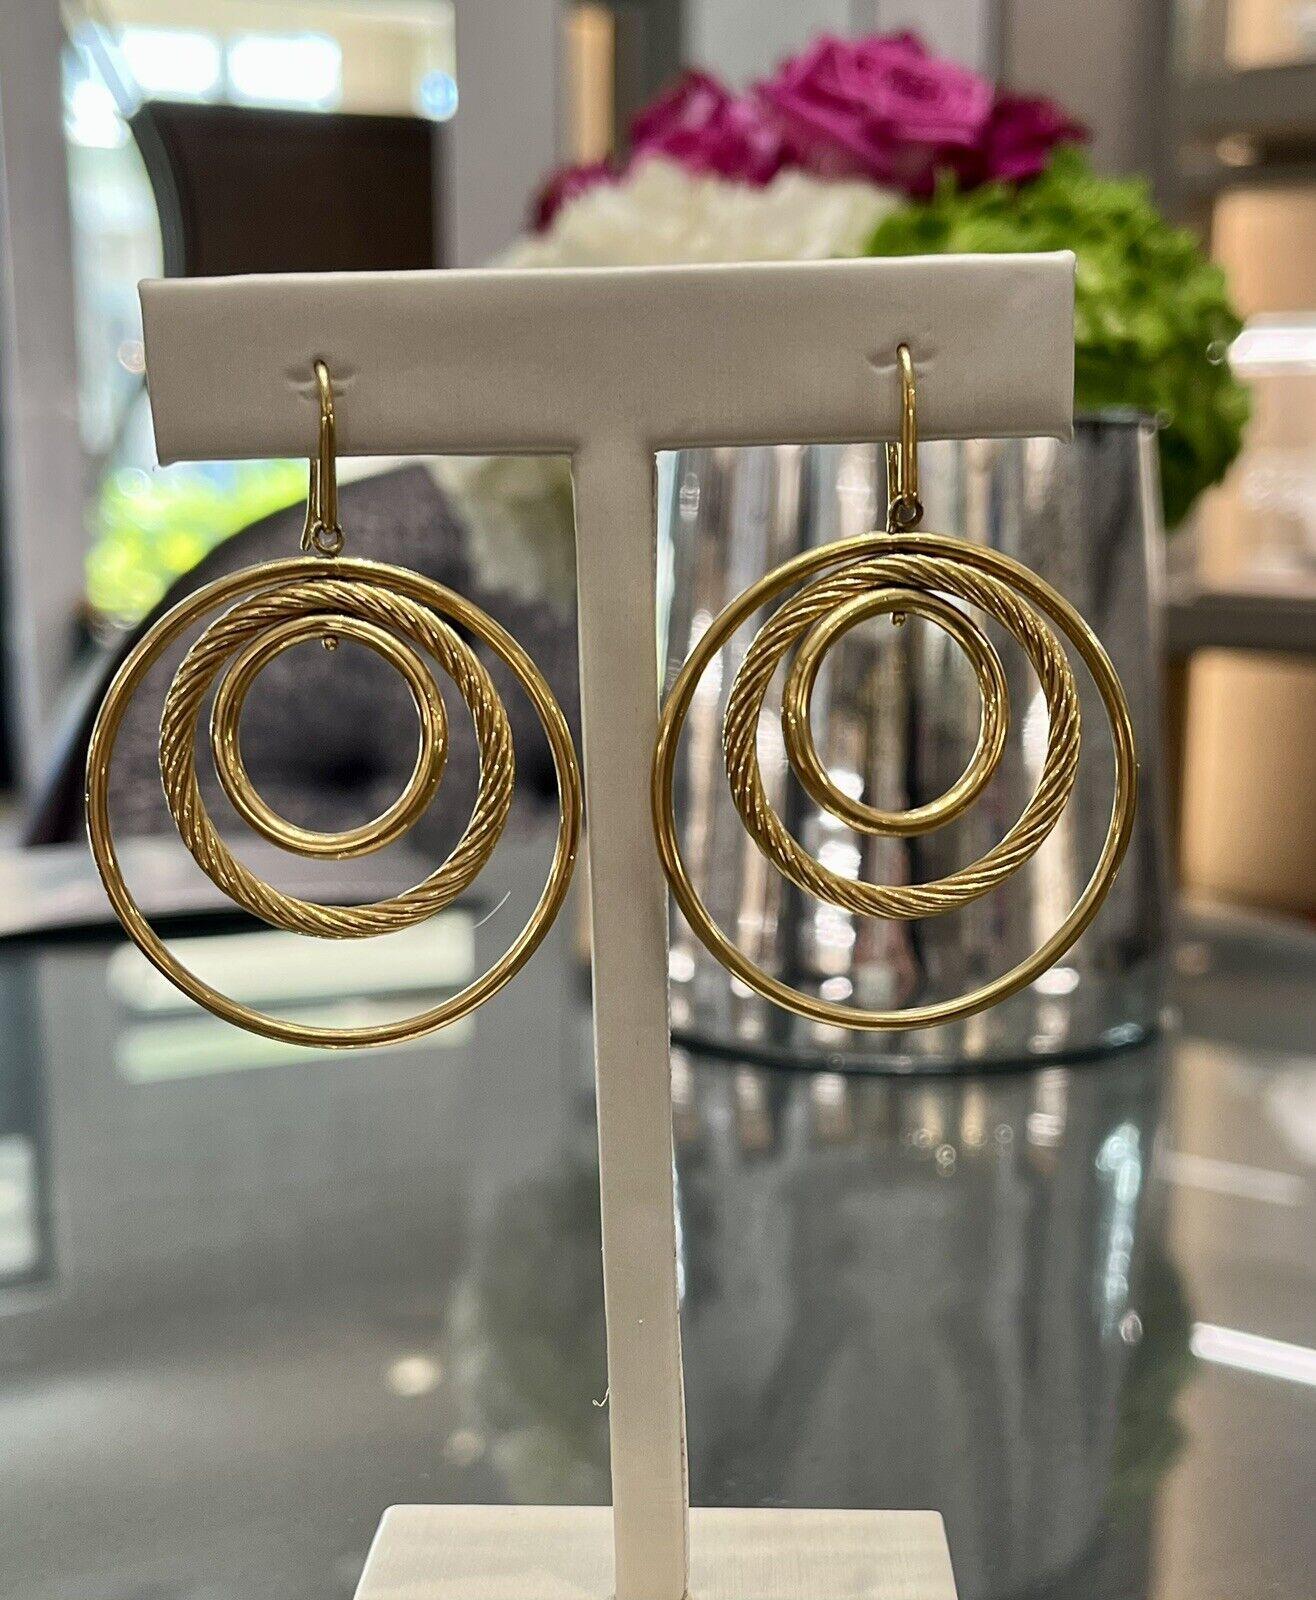 Elevate your elegance with the David Yurman 18K Yellow Gold Mobile Dangle Drop Earrings, a mesmerizing fusion of sophistication and craftsmanship. Impeccably crafted from 18K yellow gold and stamped 750 for authenticity, these exquisite earrings